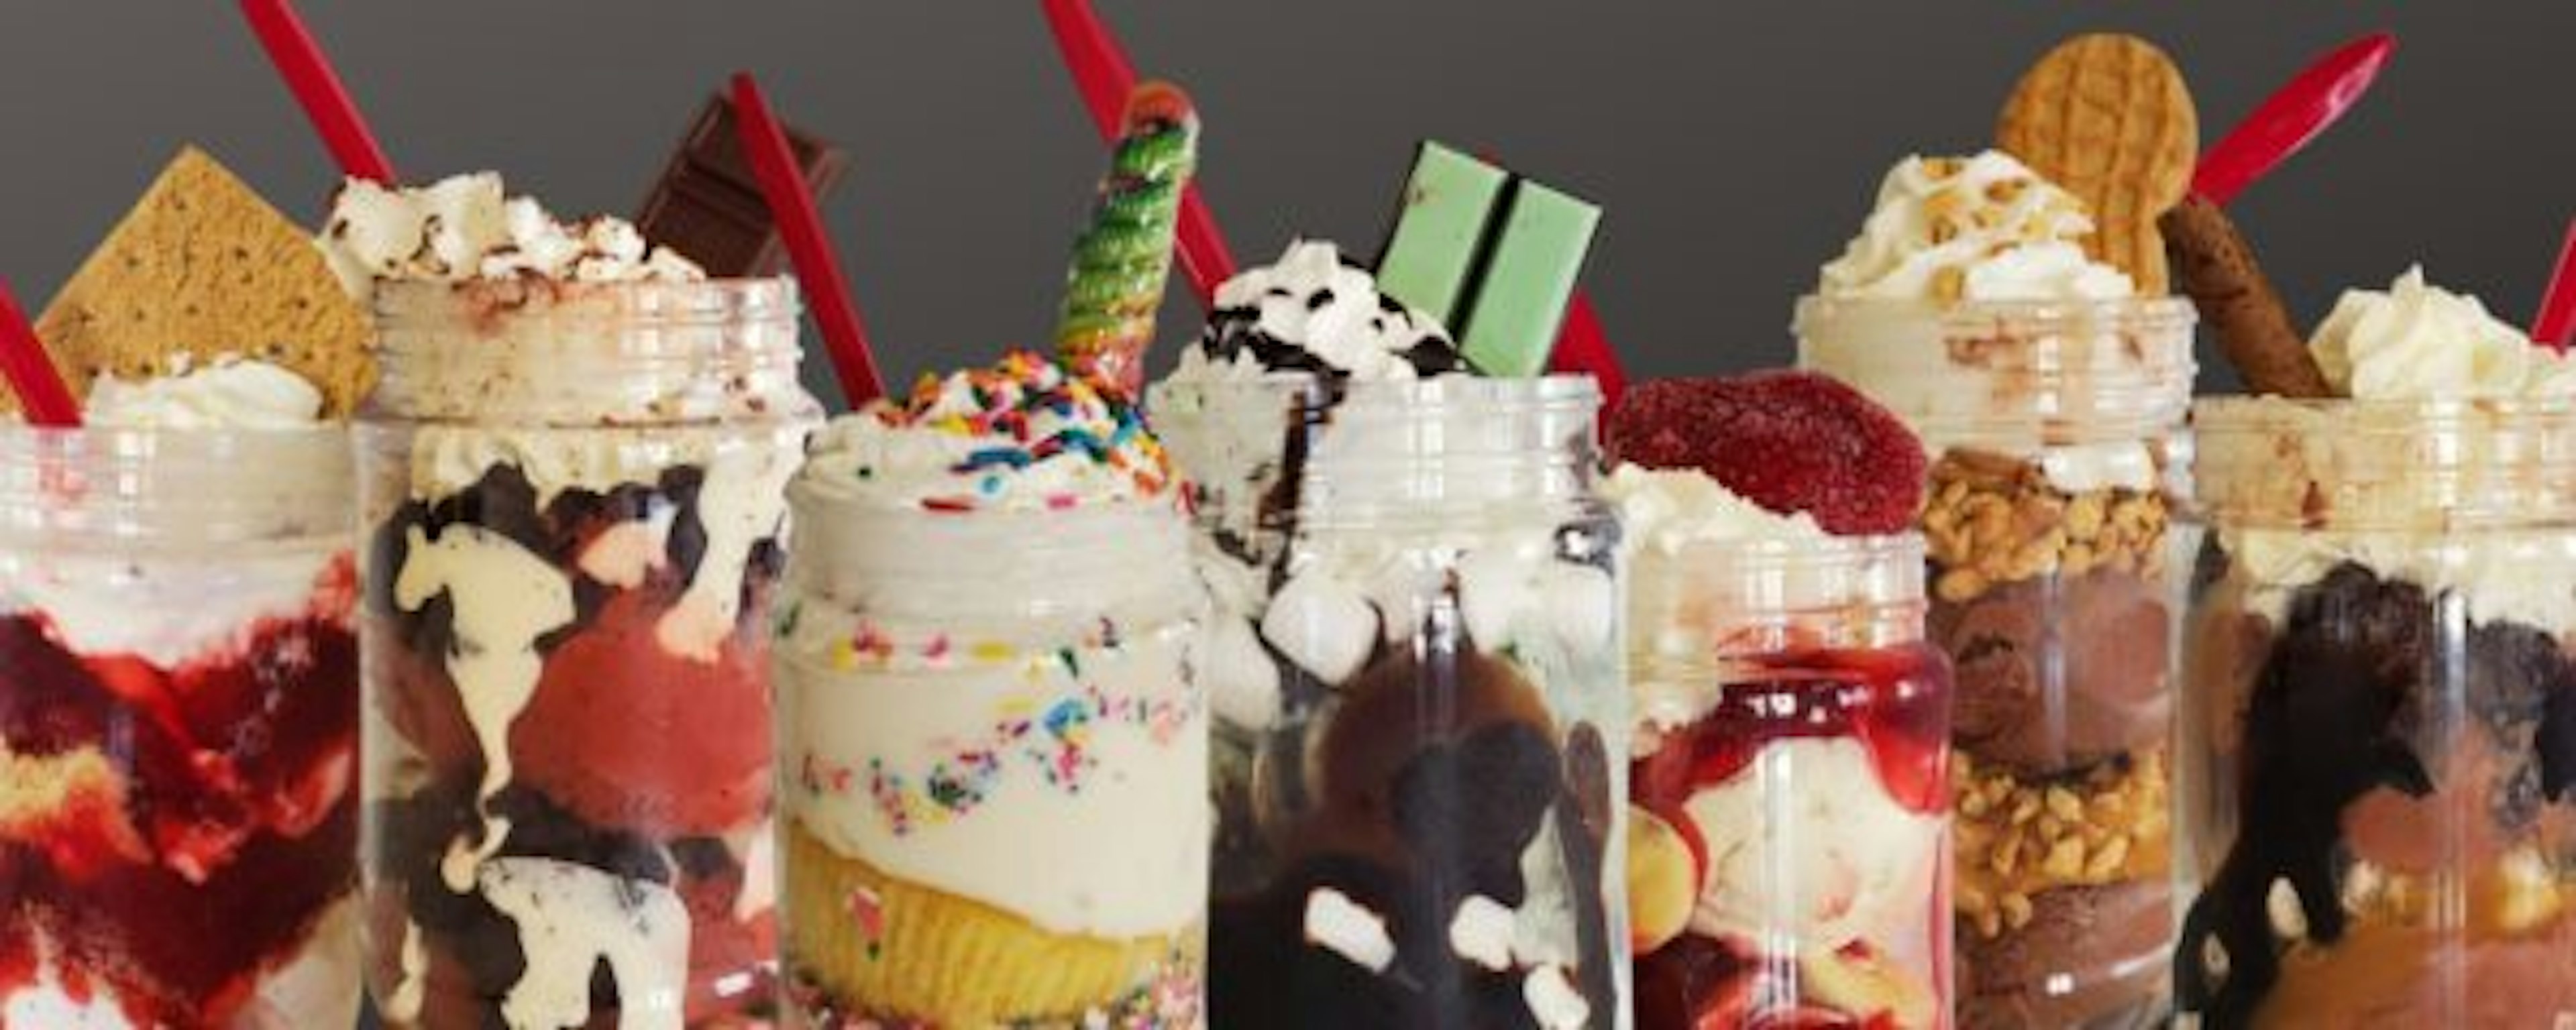 $1.00 OFF with the Purchase of any (2) Mason Jar Parfaits